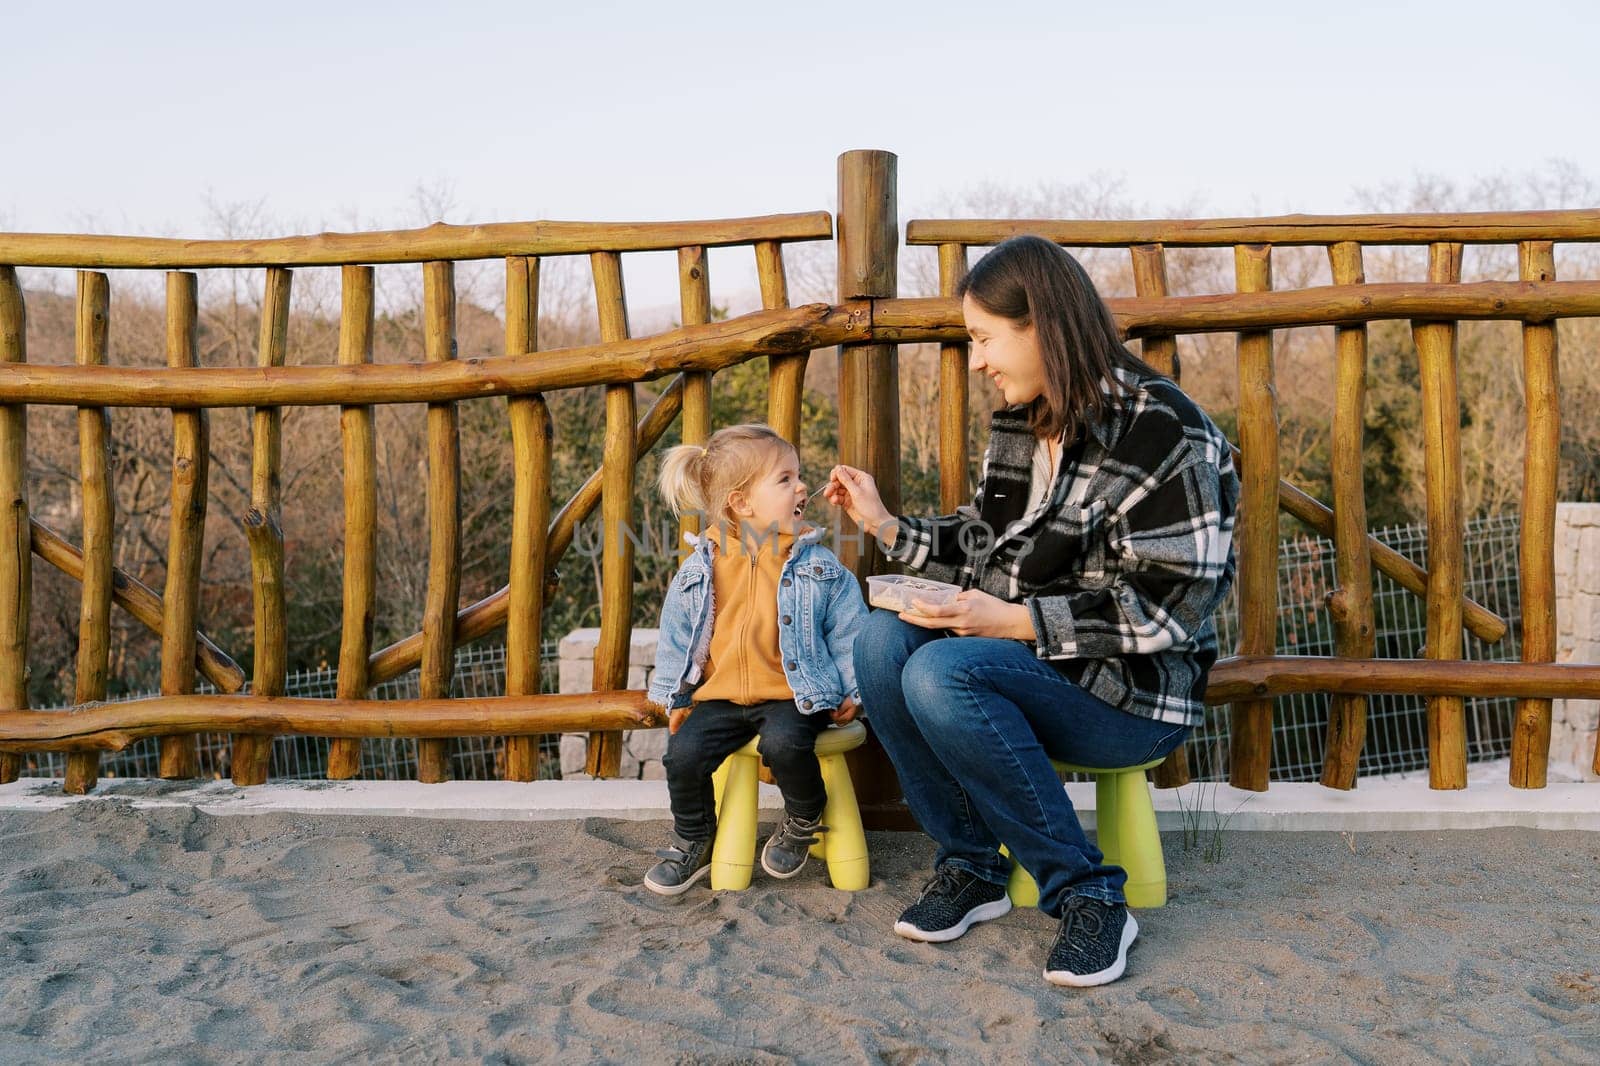 Mom feeds a little girl from a spoon while sitting on chairs near a wooden fence. High quality photo